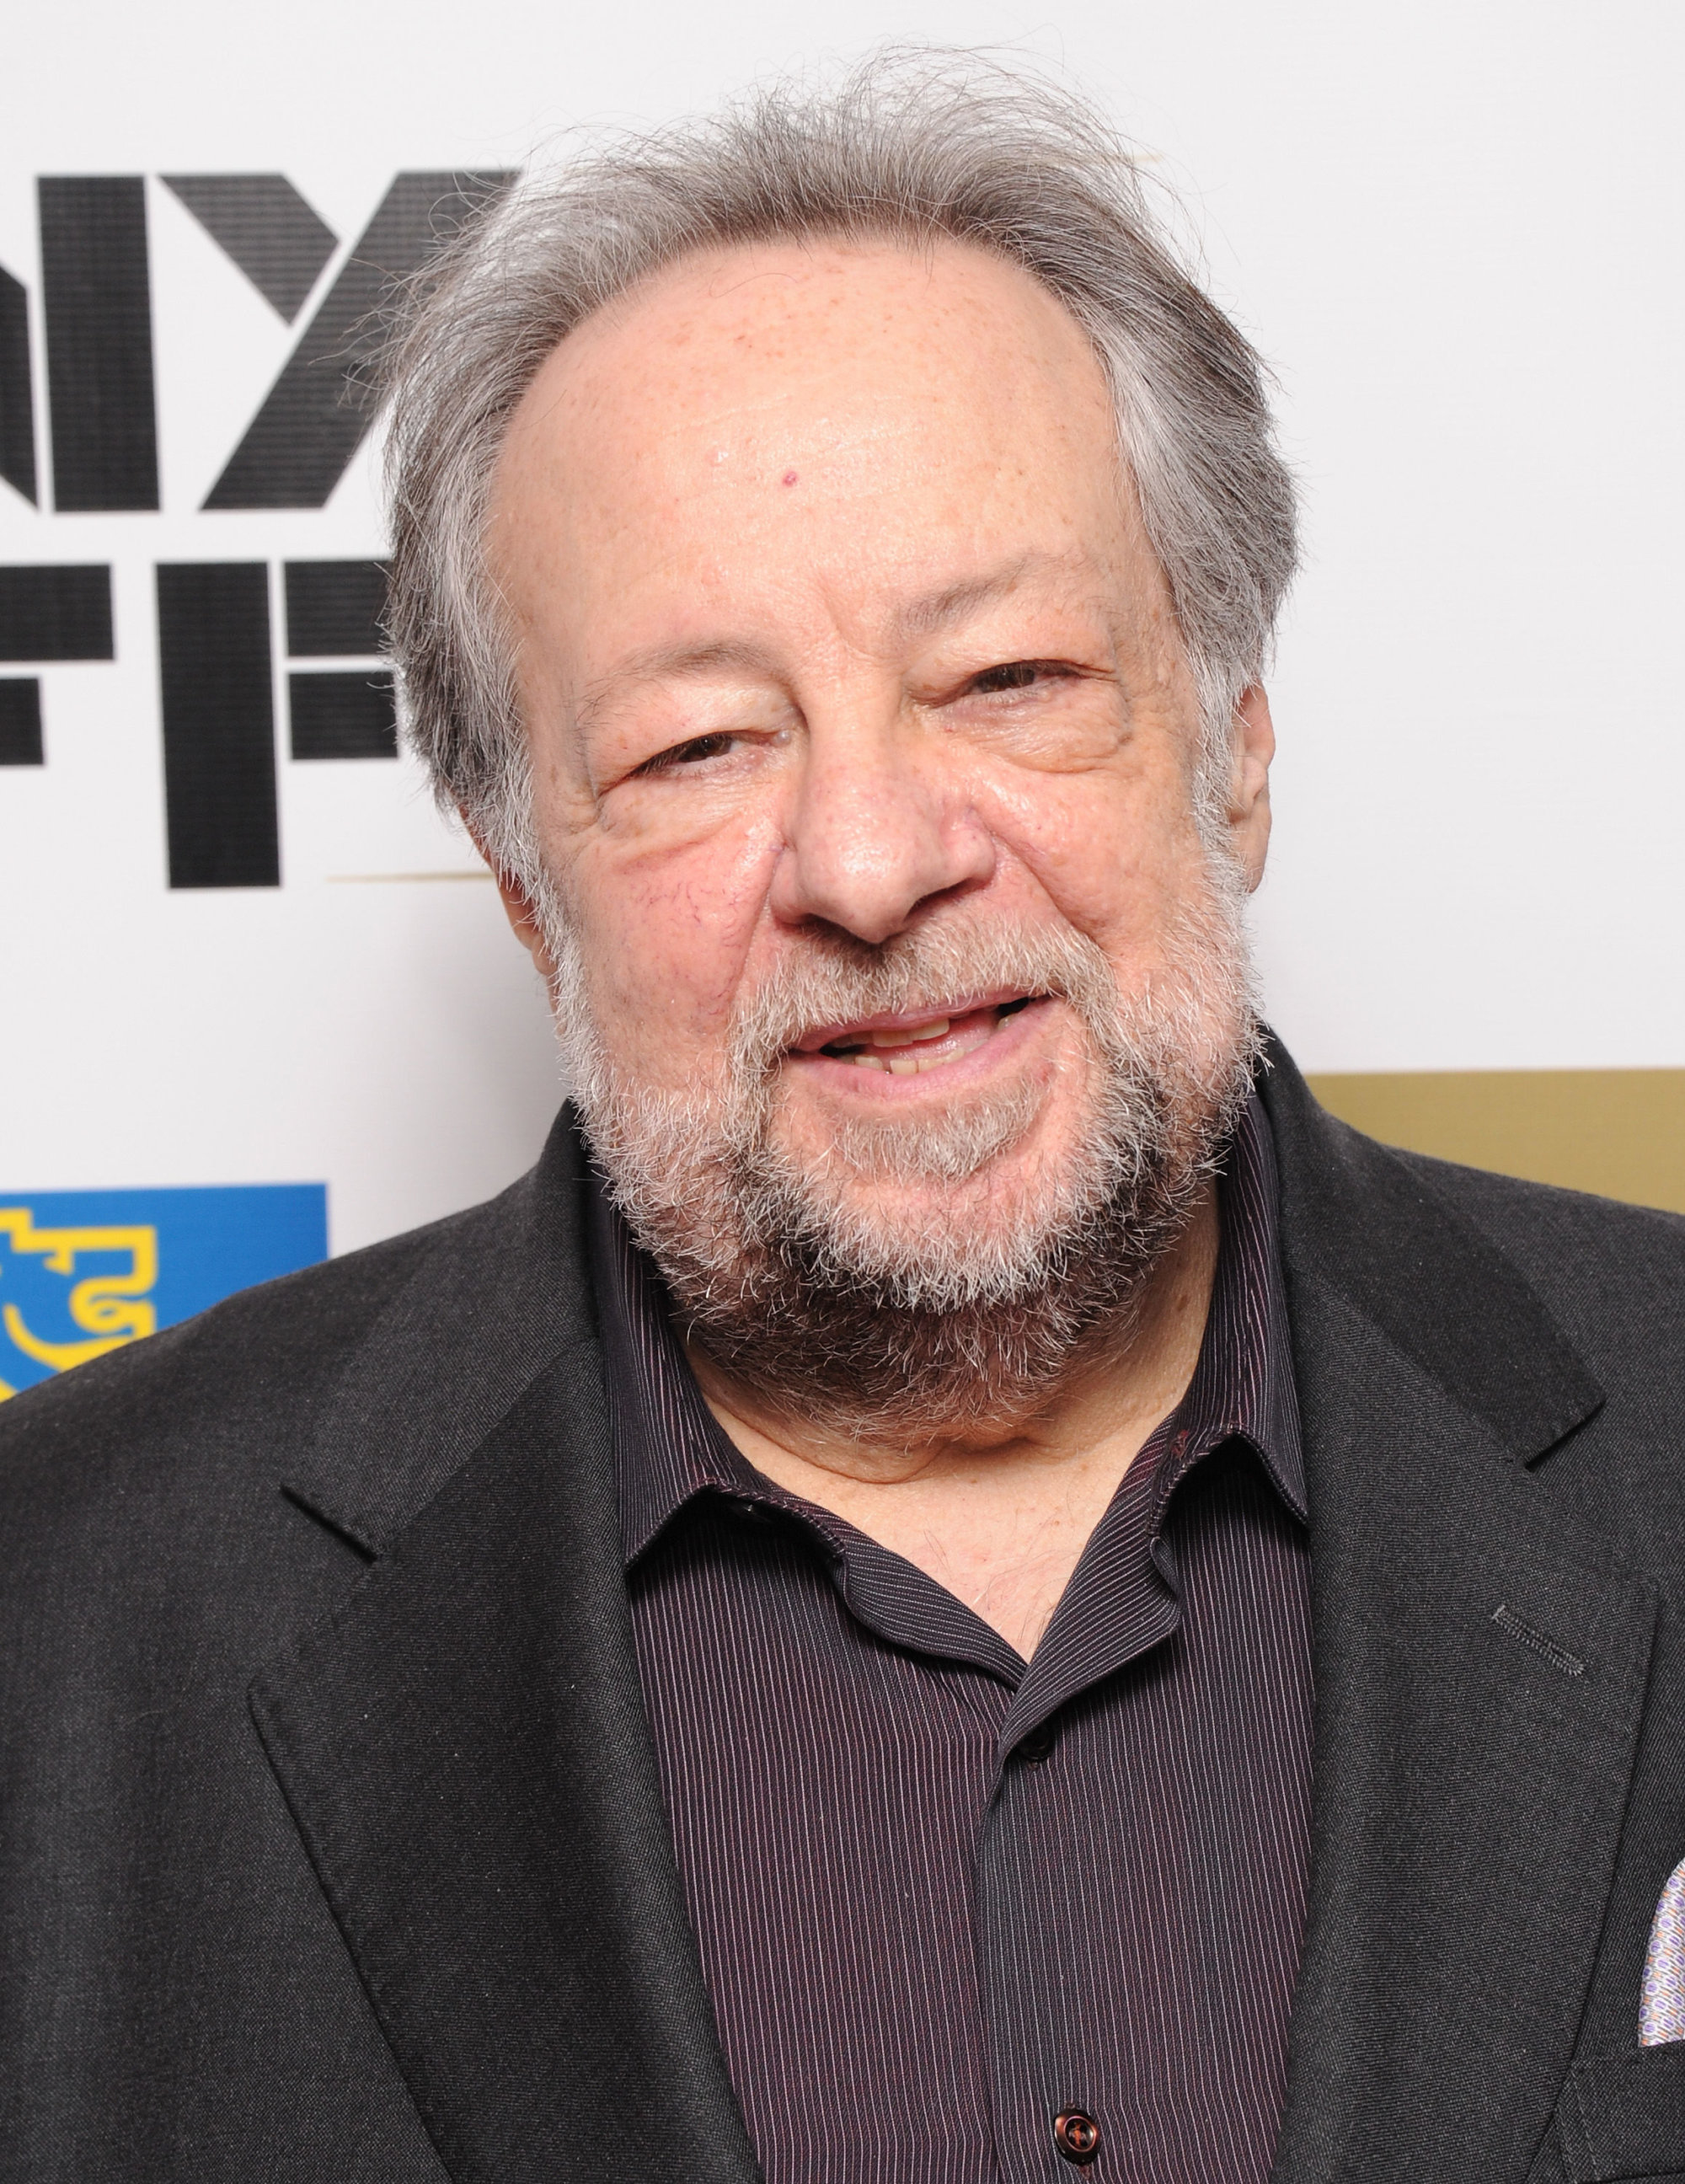 NEW YORK, NY - SEPTEMBER 28:  Actor Ricky Jay attends the Opening Night Gala Presentation Of "Life Of Pi" at the 50th New York Film Festival at Alice Tully Hall on September 28, 2012 in New York City.  (Photo by Jamie McCarthy/Getty Images)